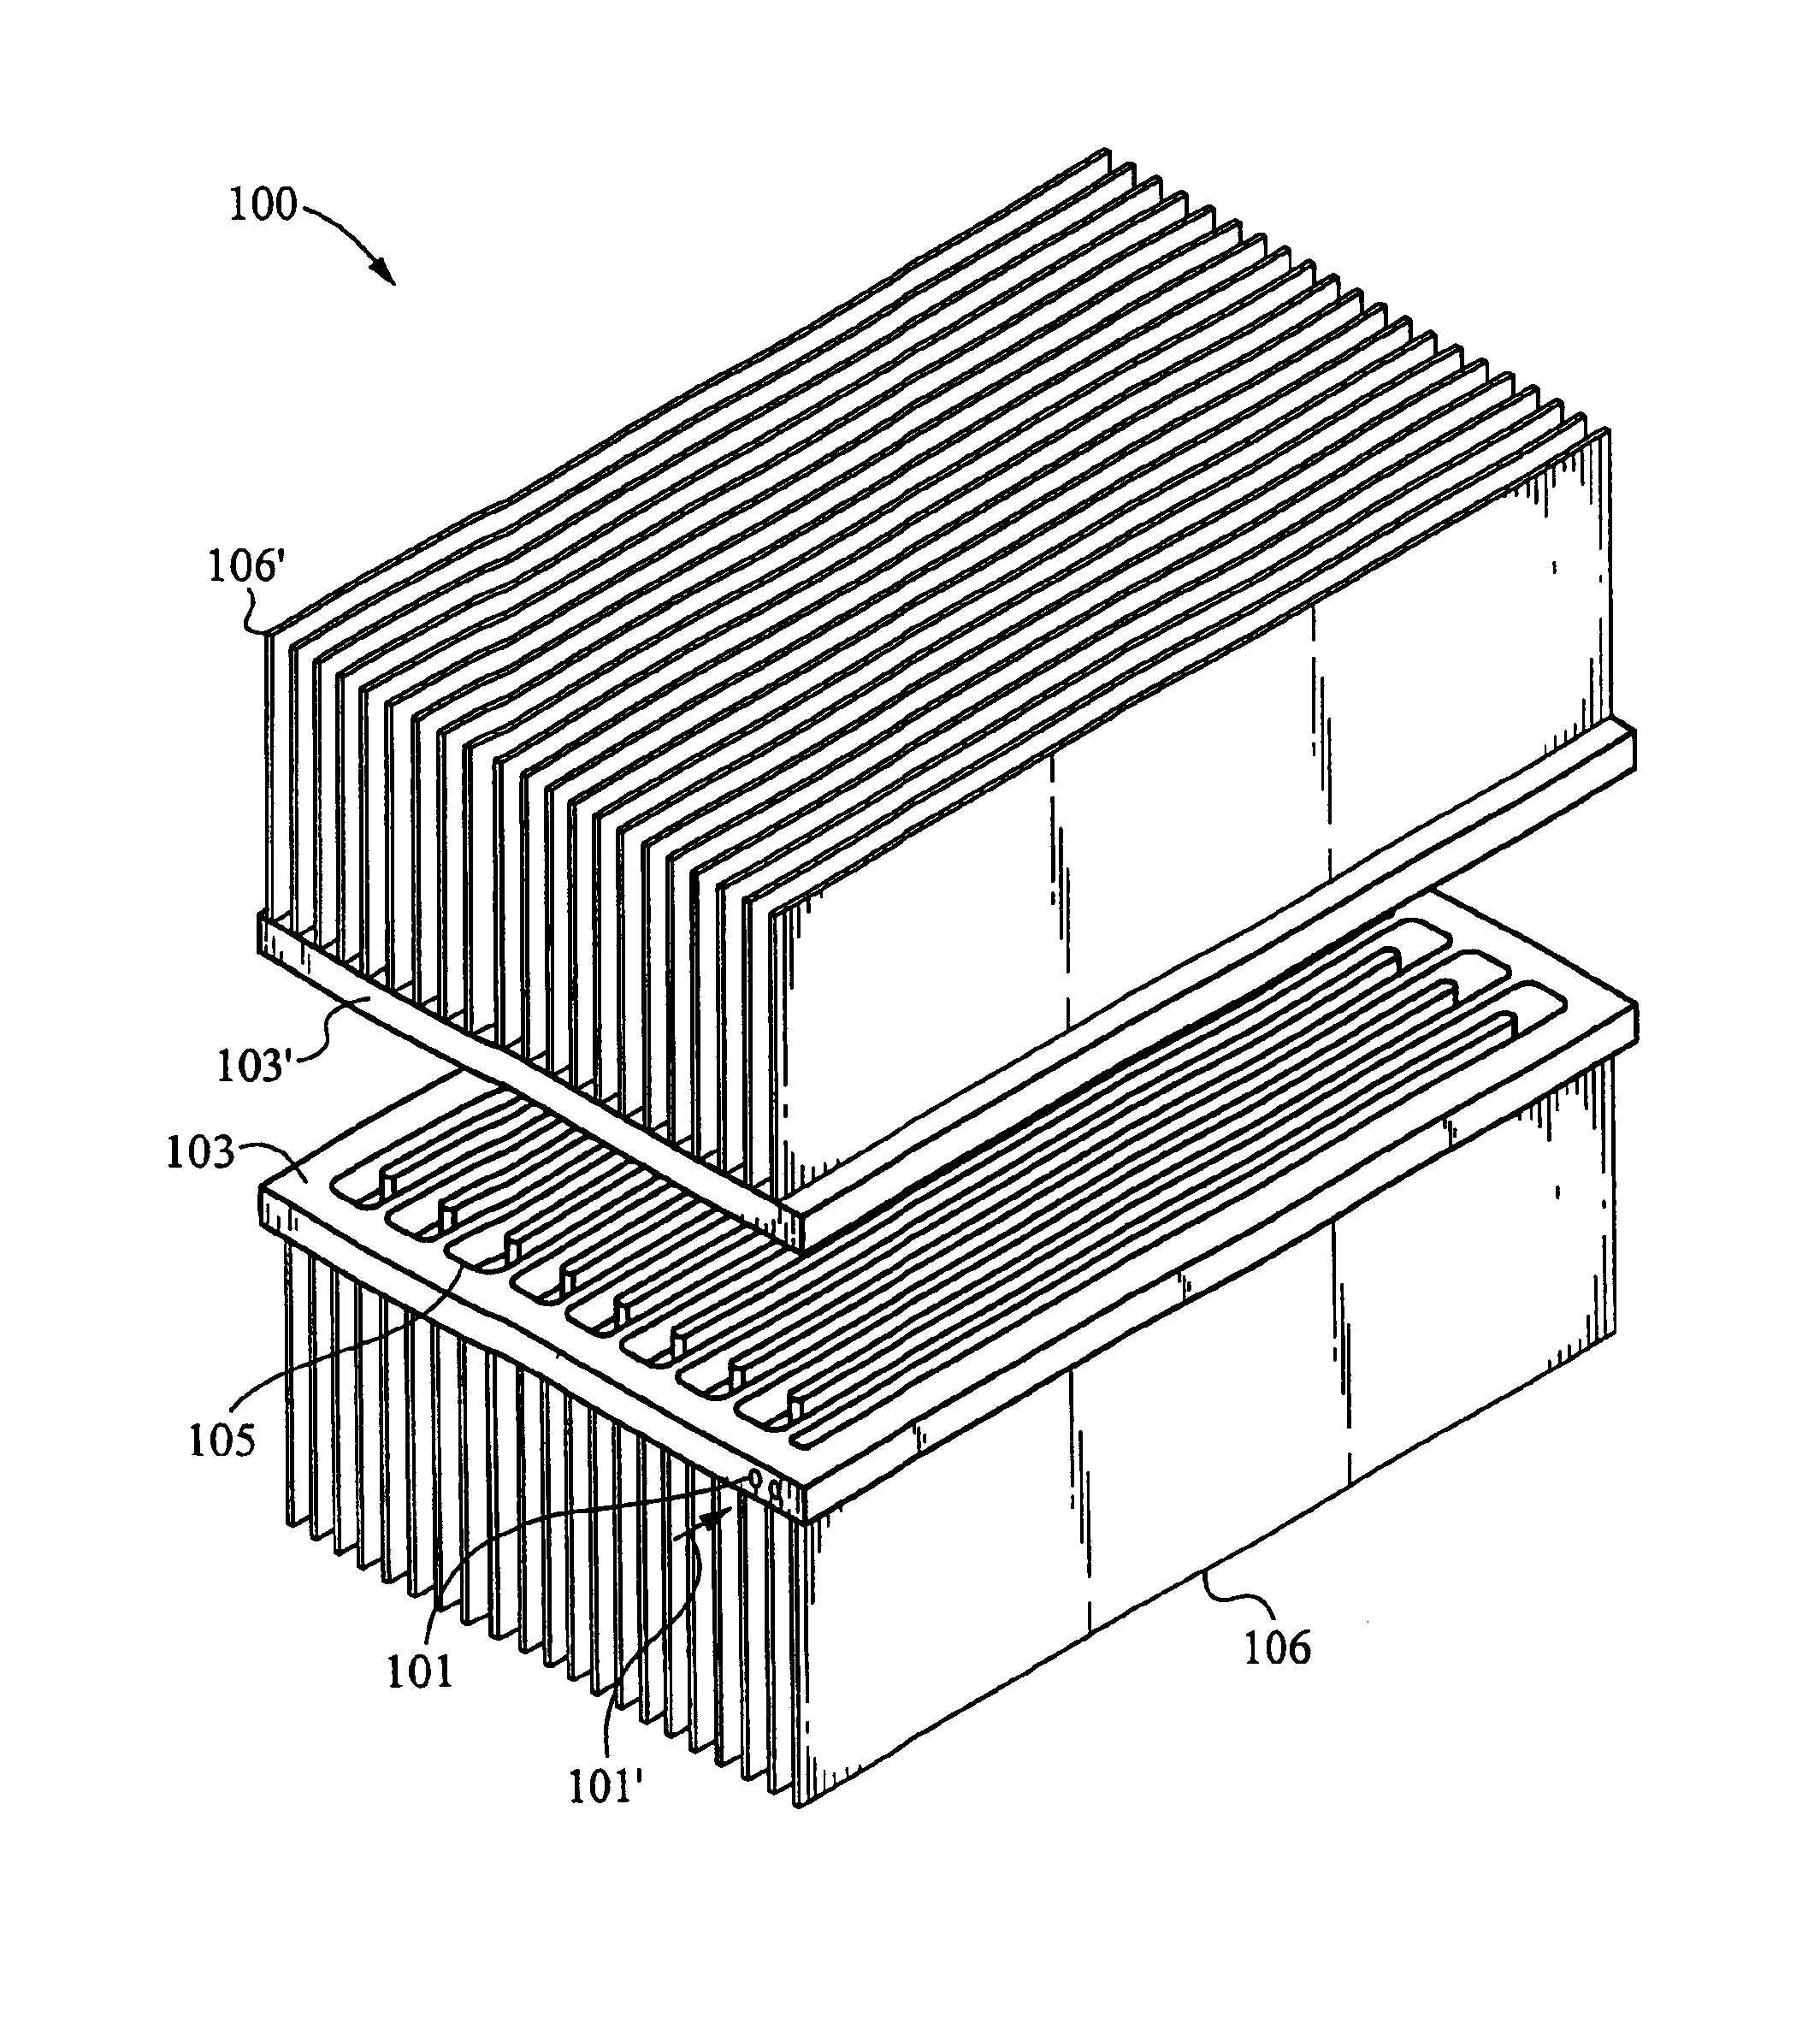 Channeled flat plate fin heat exchange system, device and method